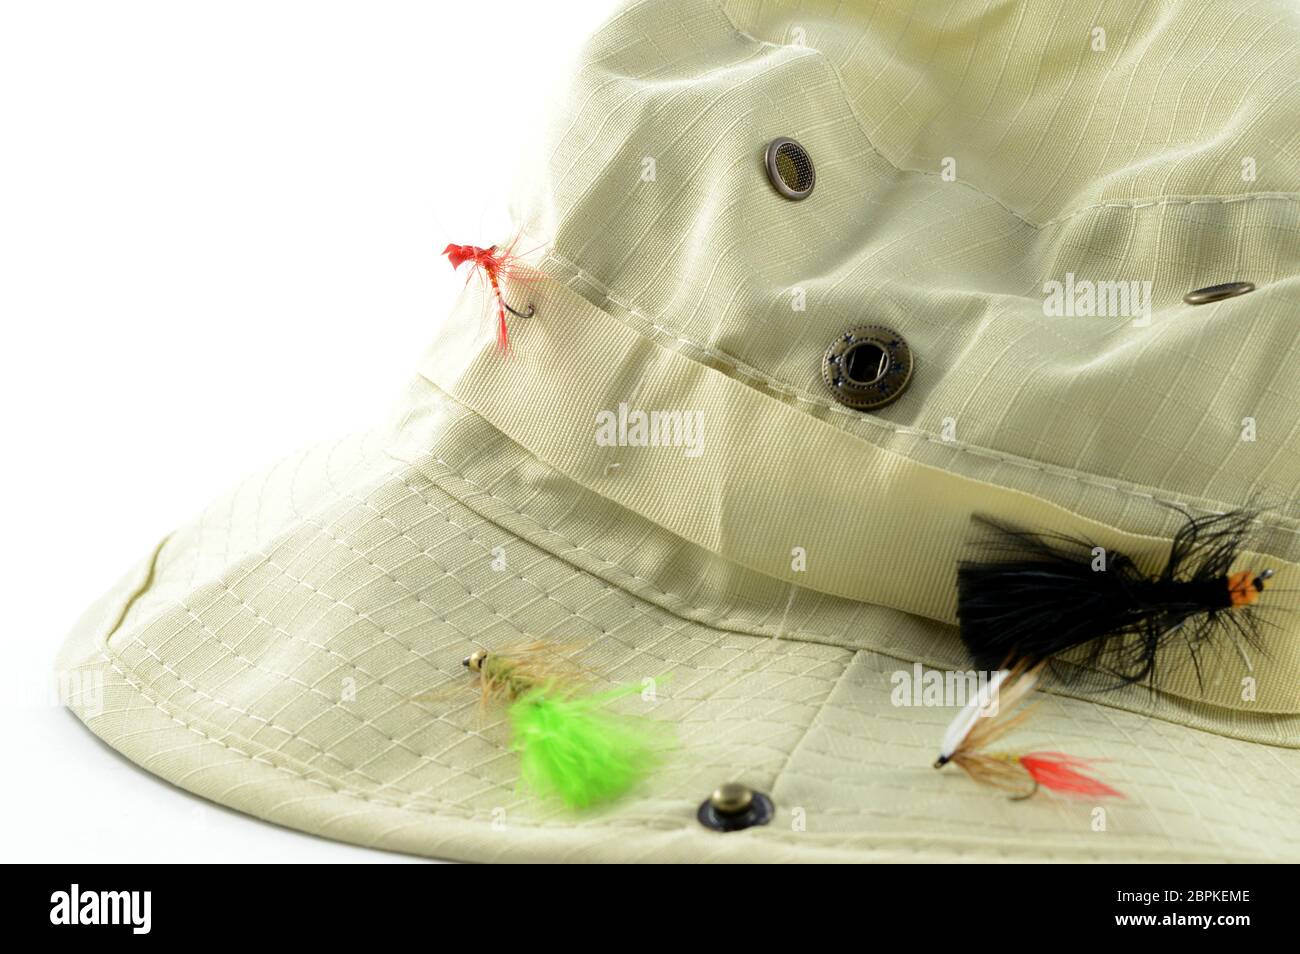 https://c8.alamy.com/comp/2BPKEME/closeup-view-of-a-fishermans-hat-with-some-fly-bait-hooks-for-easy-access-2BPKEME.jpg